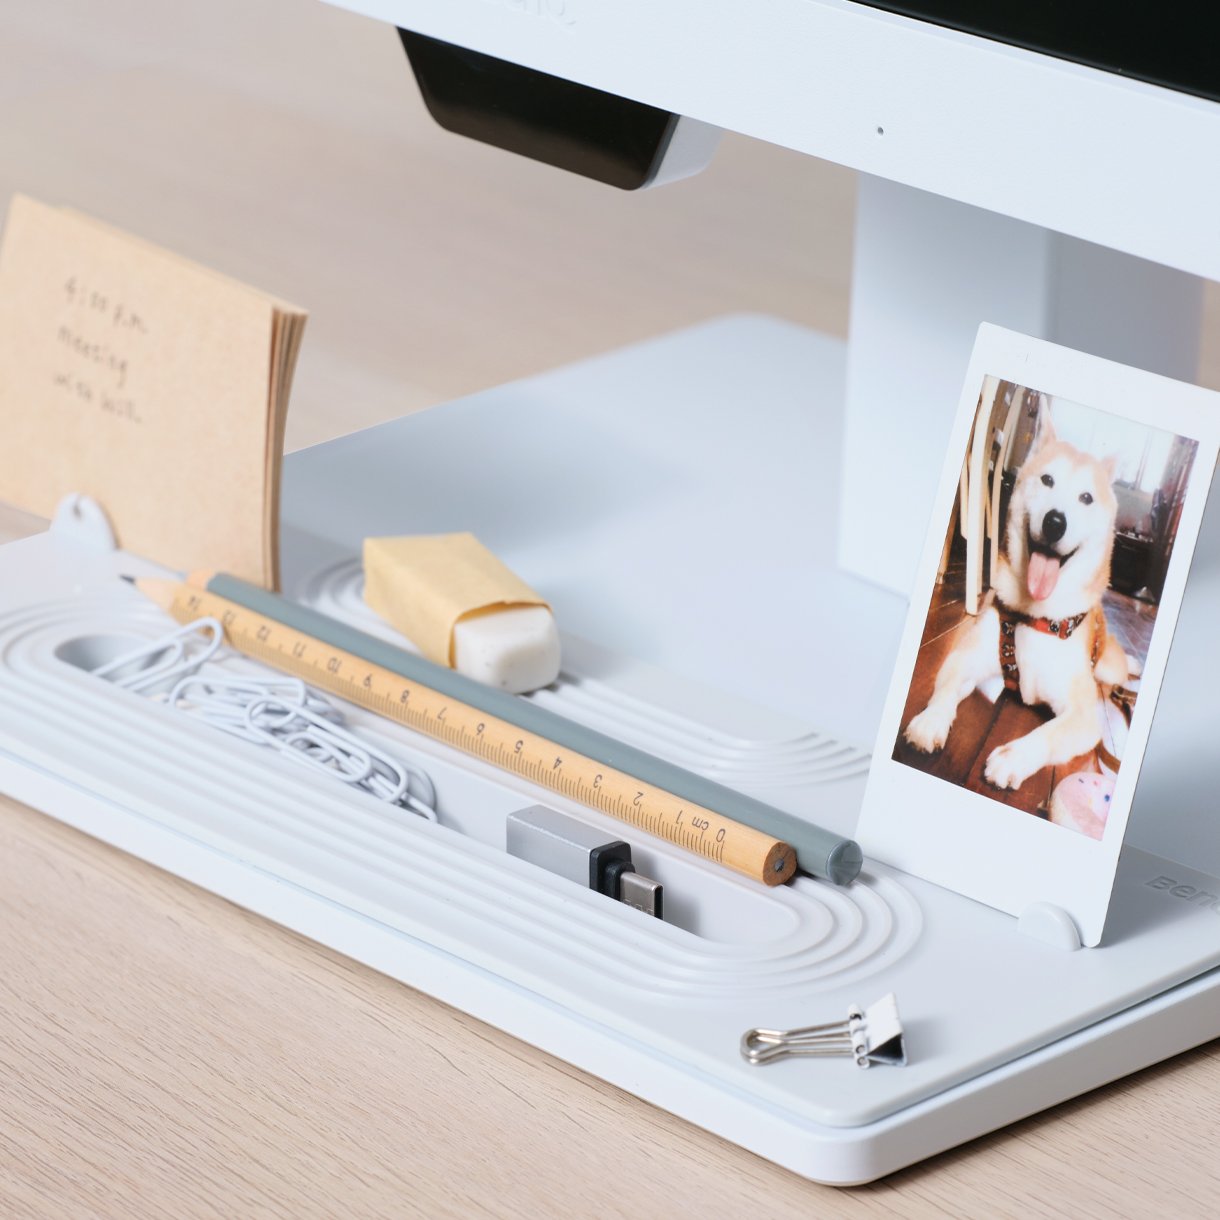 BenQ GW2790QT optional accessory base cover GC01 organizes stationery and clears your desk surface for higher productivity.